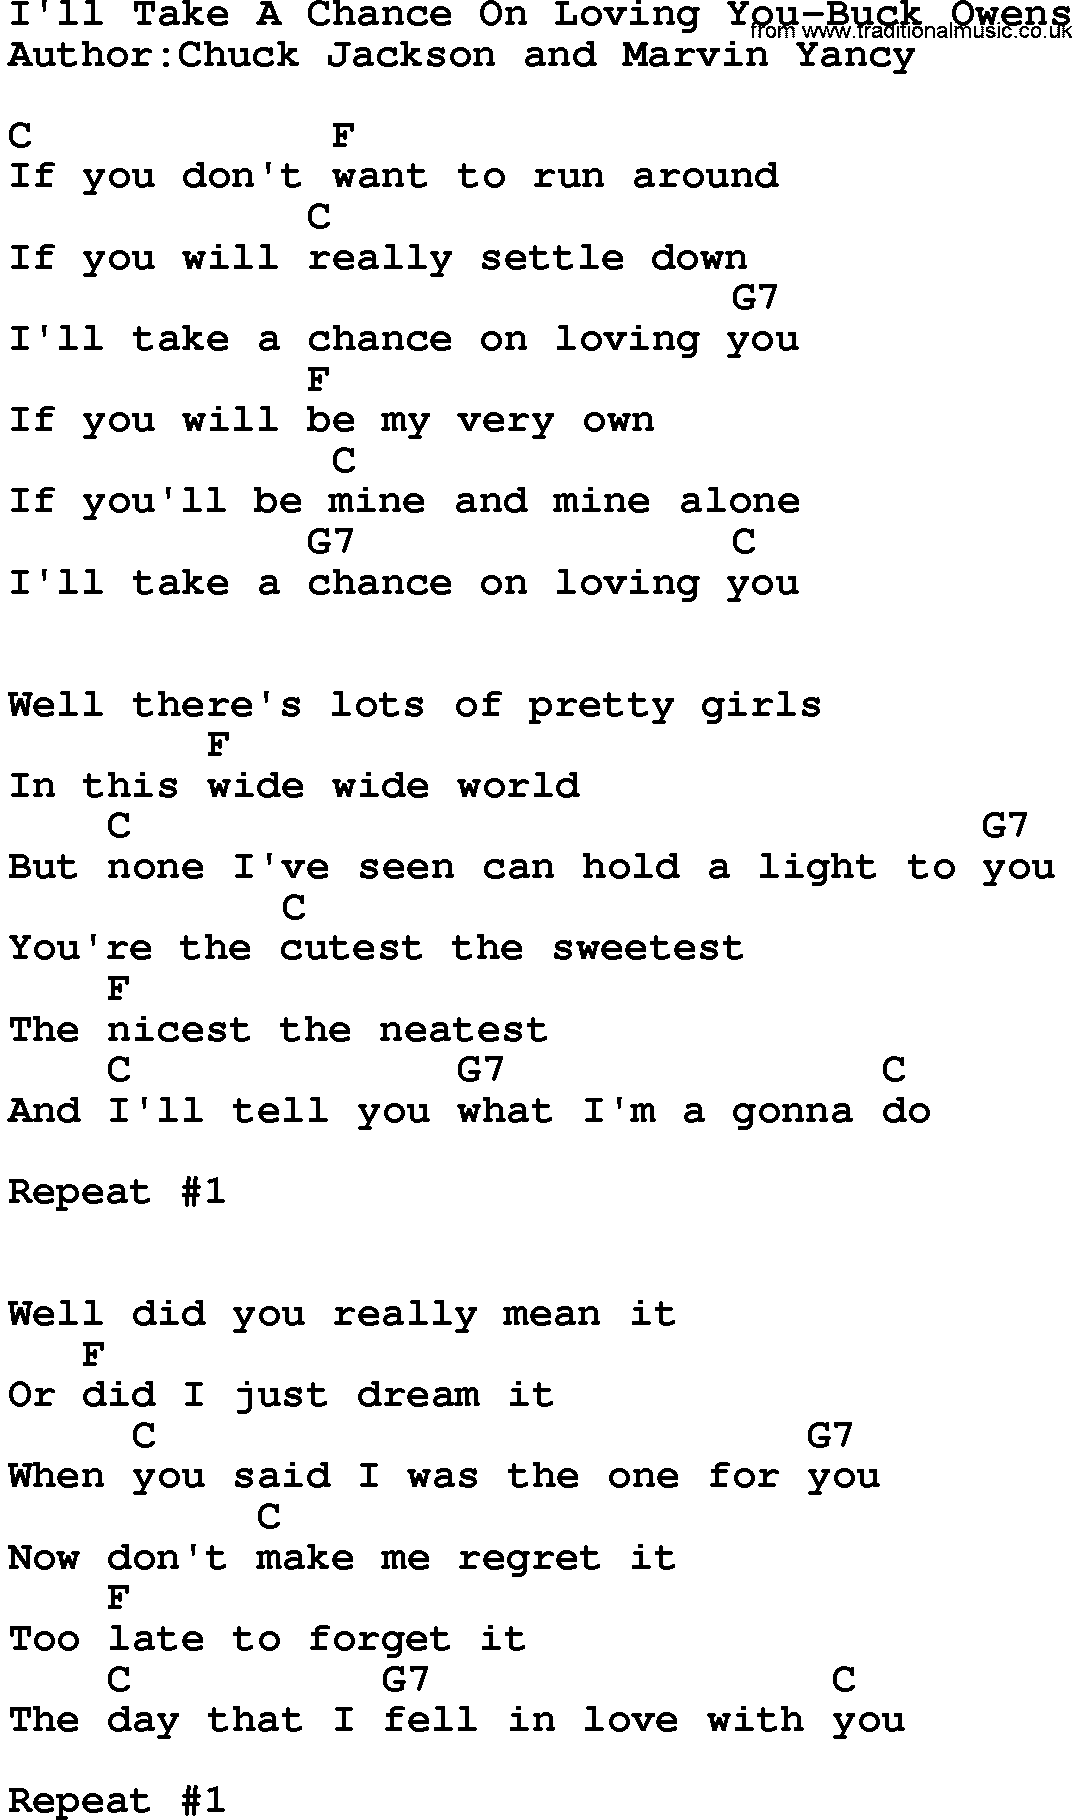 Country music song: I'll Take A Chance On Loving You-Buck Owens lyrics and chords